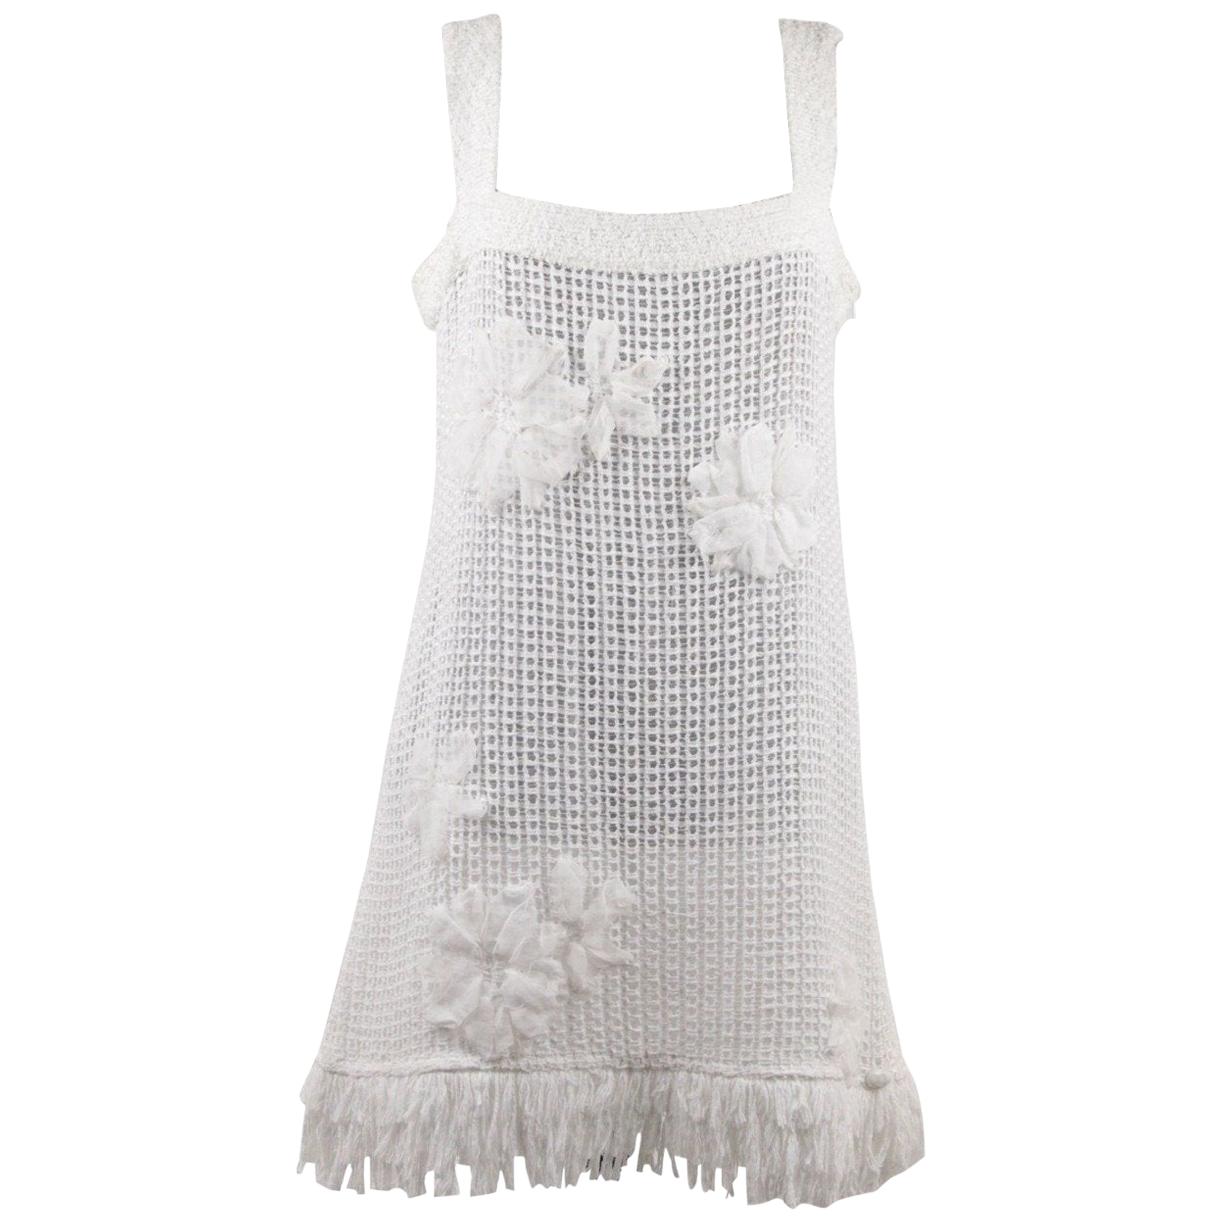 Chanel White Pure Cotton Sleeveless Shift Dress with Flowers Size 40